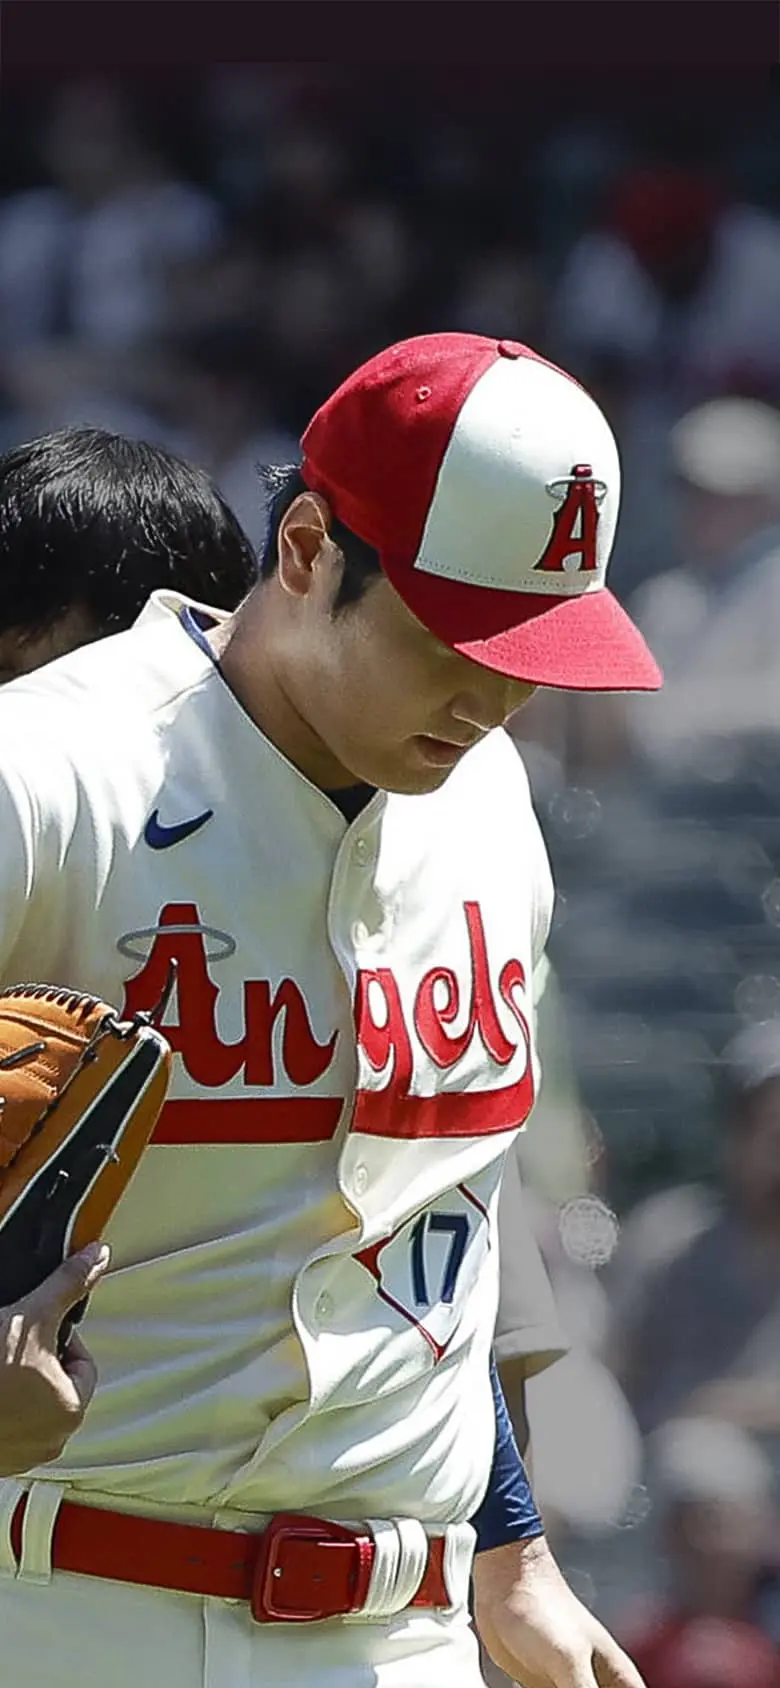 Shohei Ohtani, the pitcher, stepping off the mound.